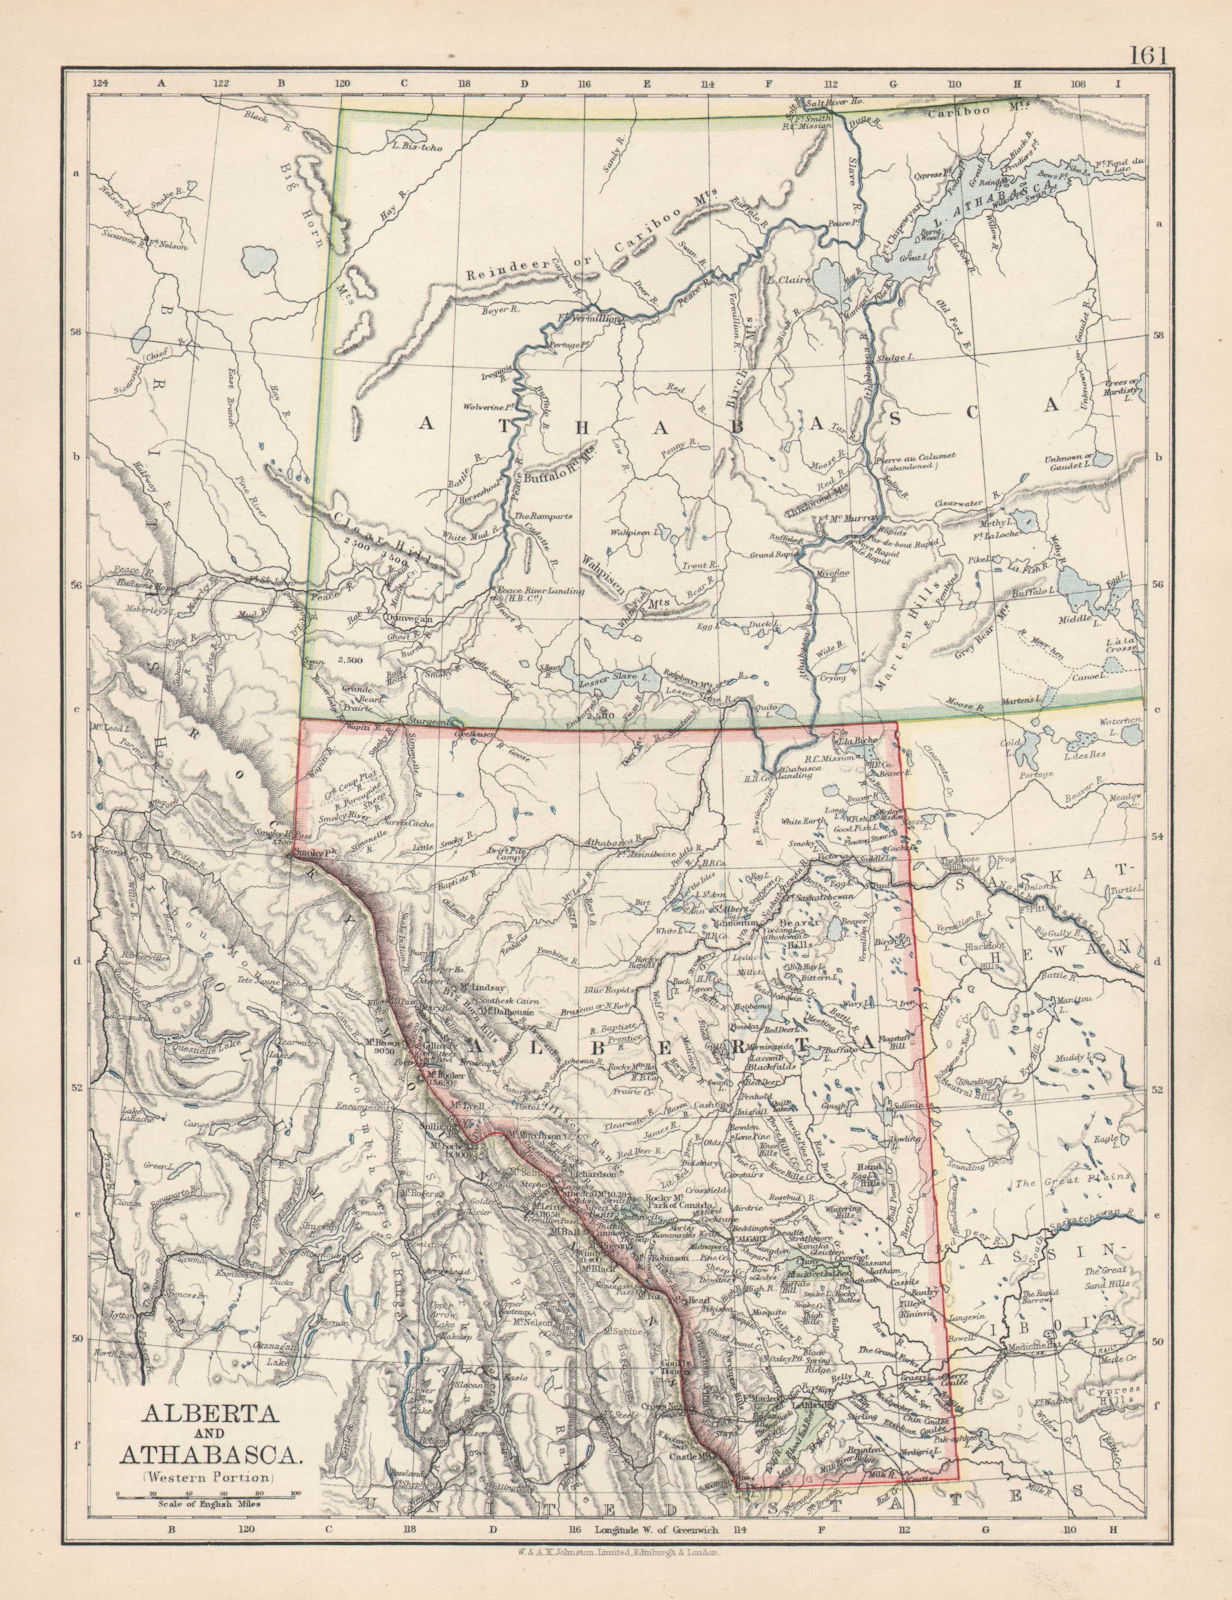 ALBERTA & ATHABASCA. Province map w/ Canadian Pacific Railroad. JOHNSTON 1901